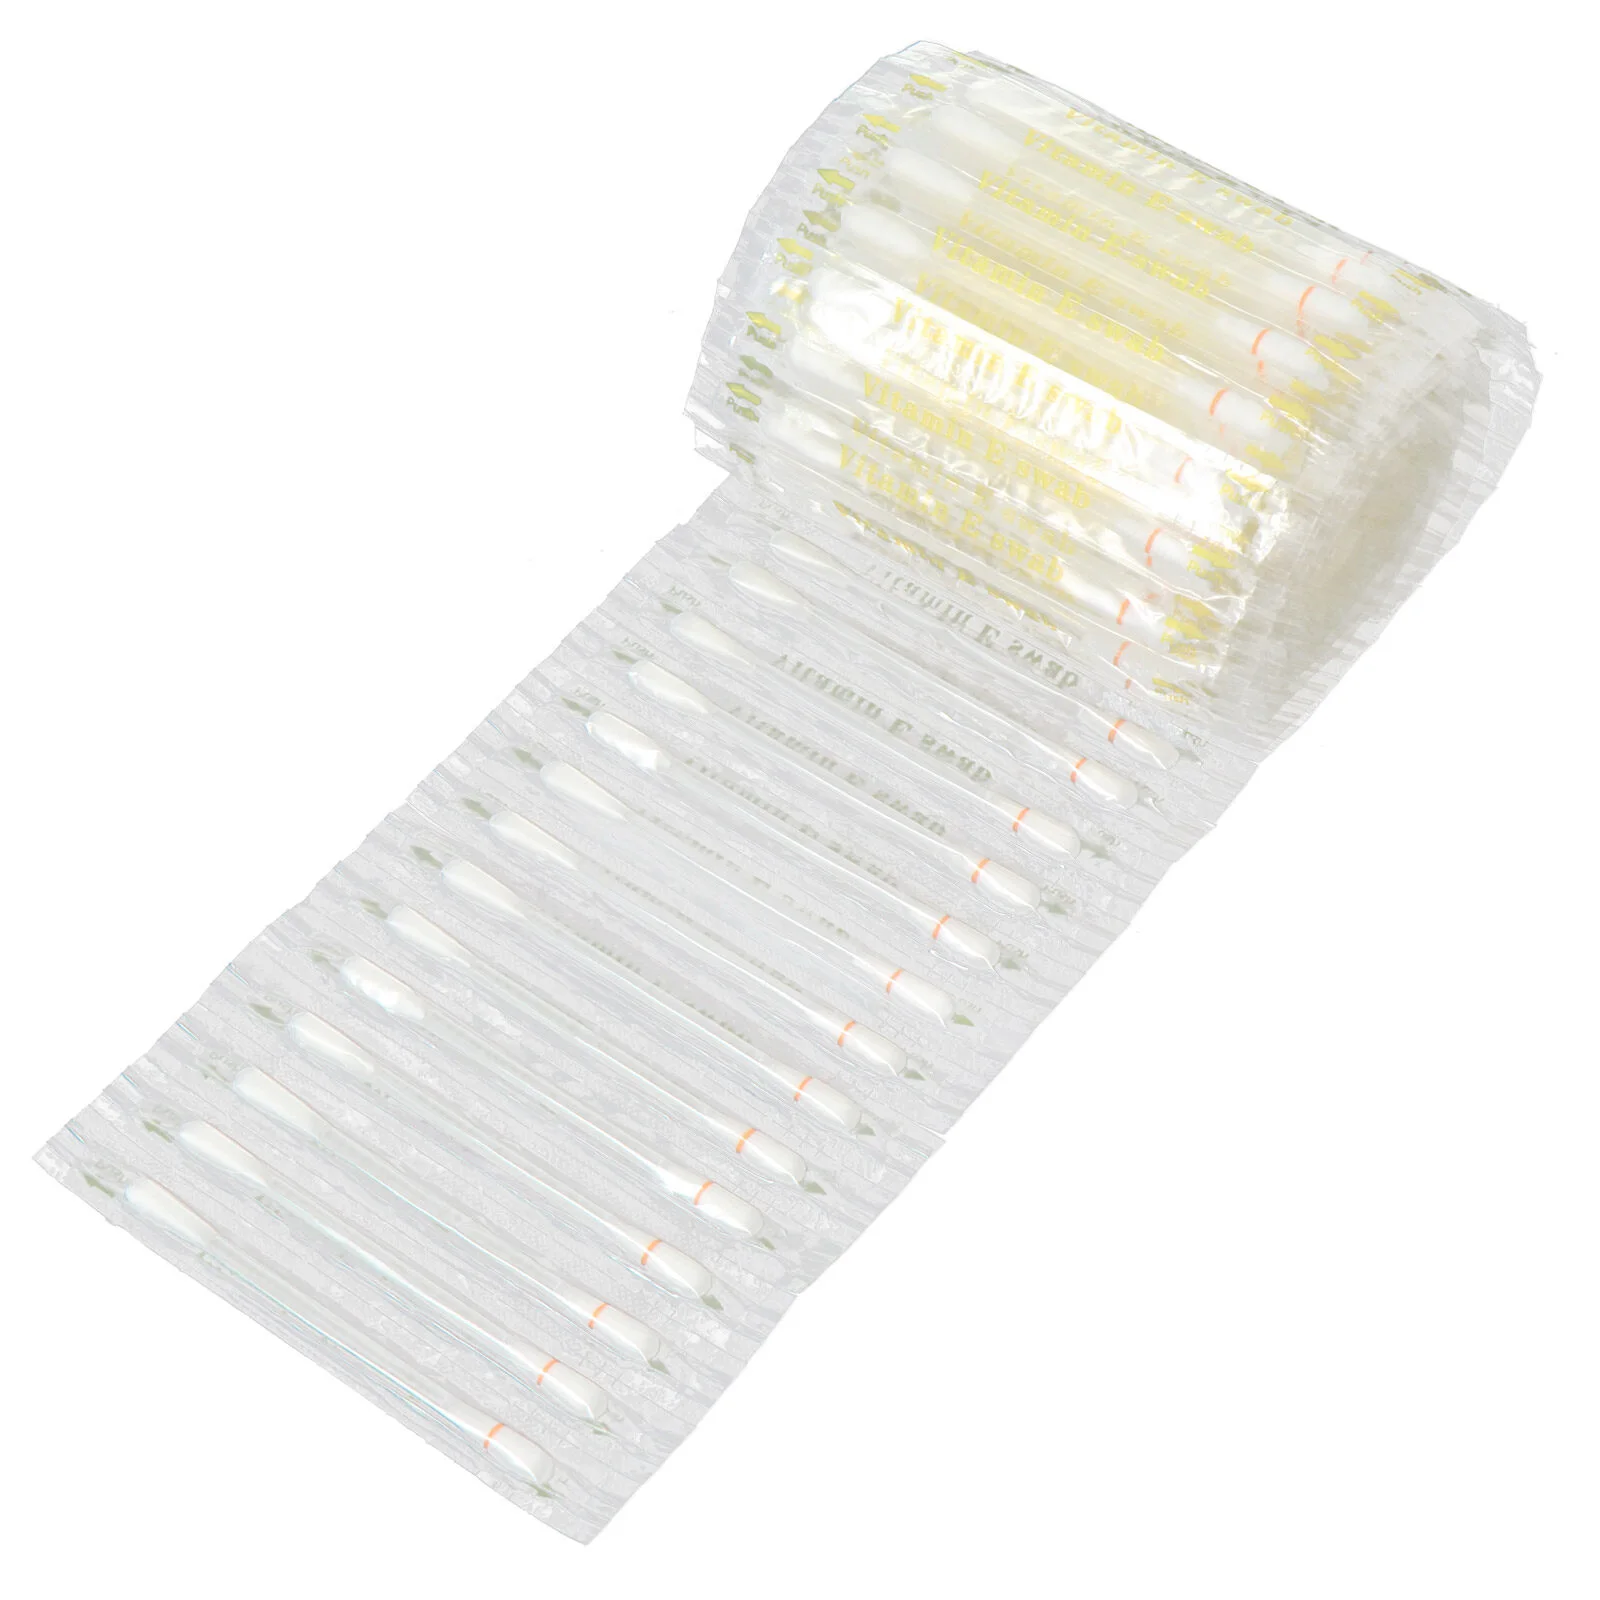 

100 Pcs Ve Cotton Swabs Oral Lip Balm Applicator Care Stick Oil Absorbent Pointed